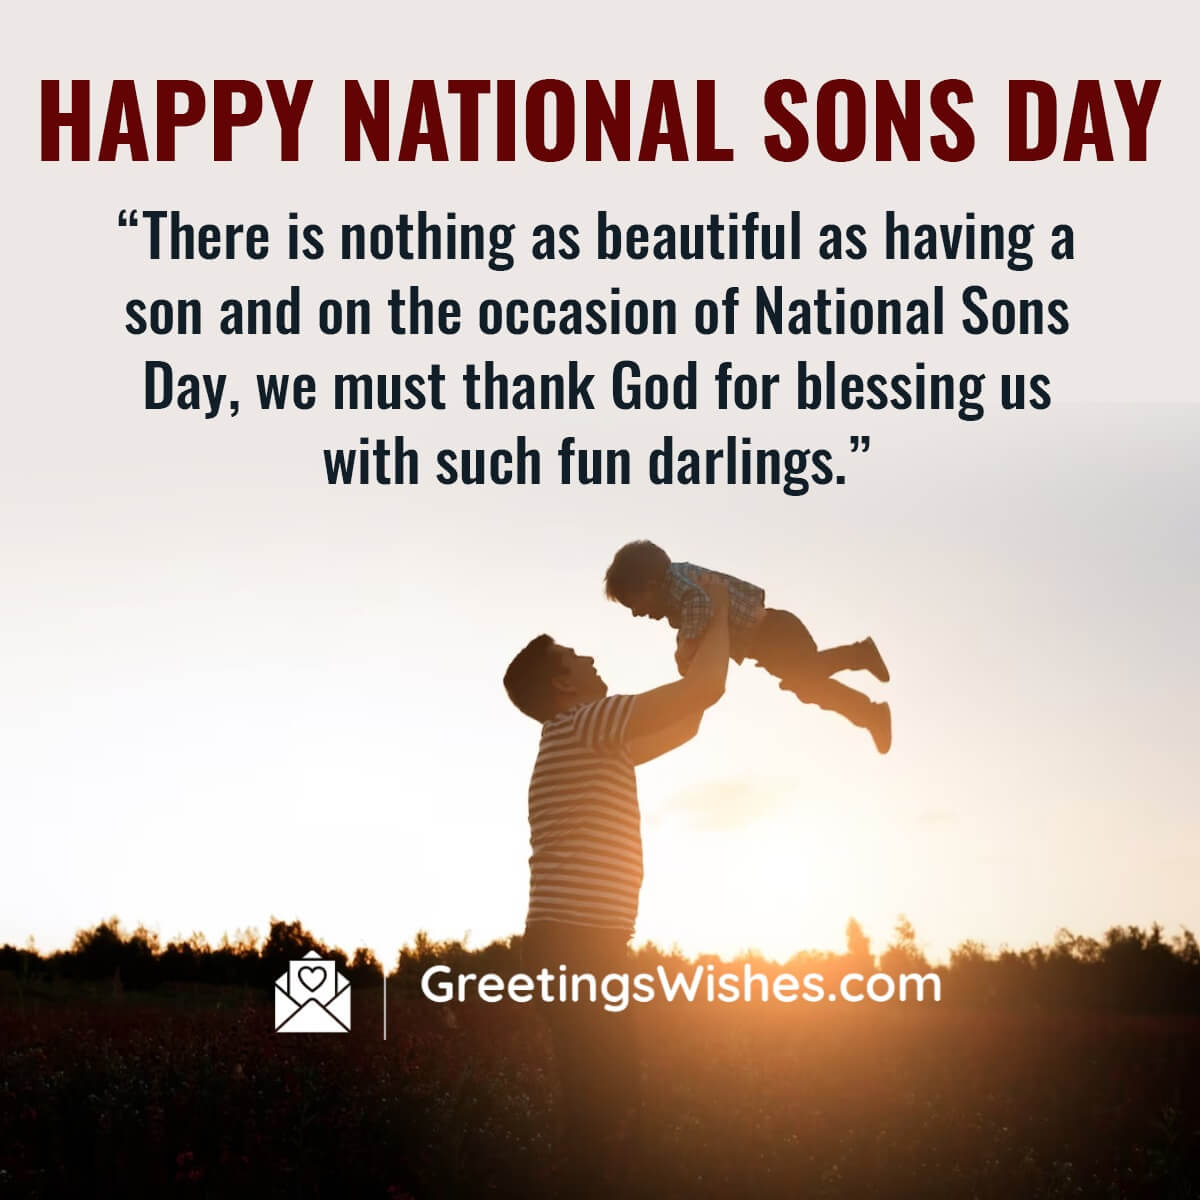 Happy National Son’s Day Wishes